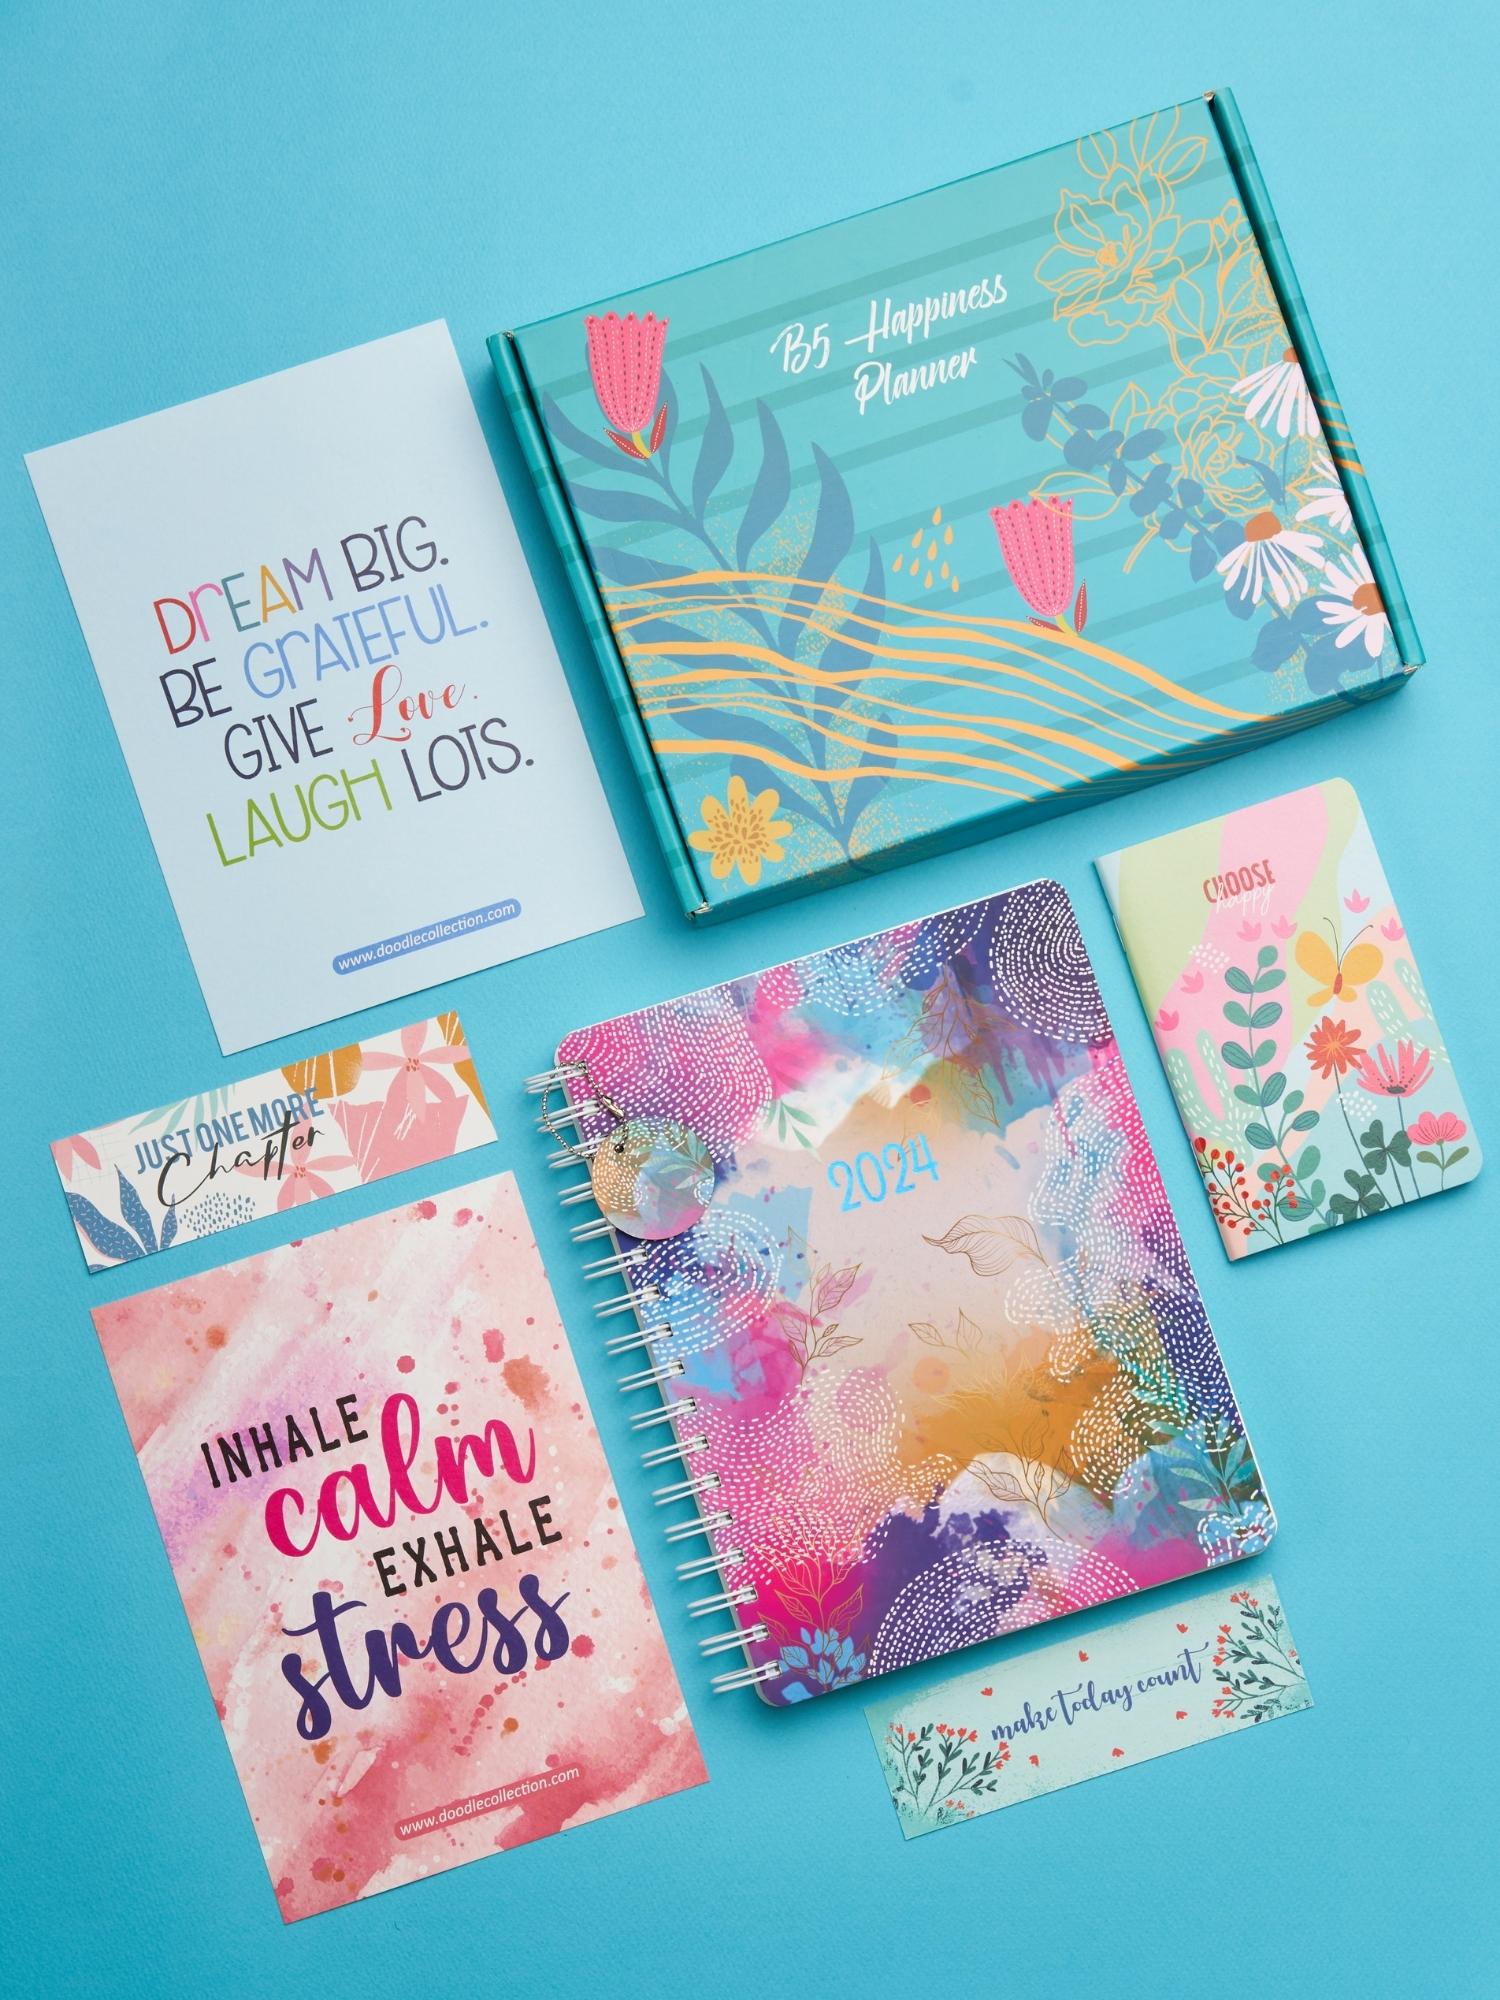 Start Anytime of the Year B5 Happiness Planner Kit (Blushed Hues)